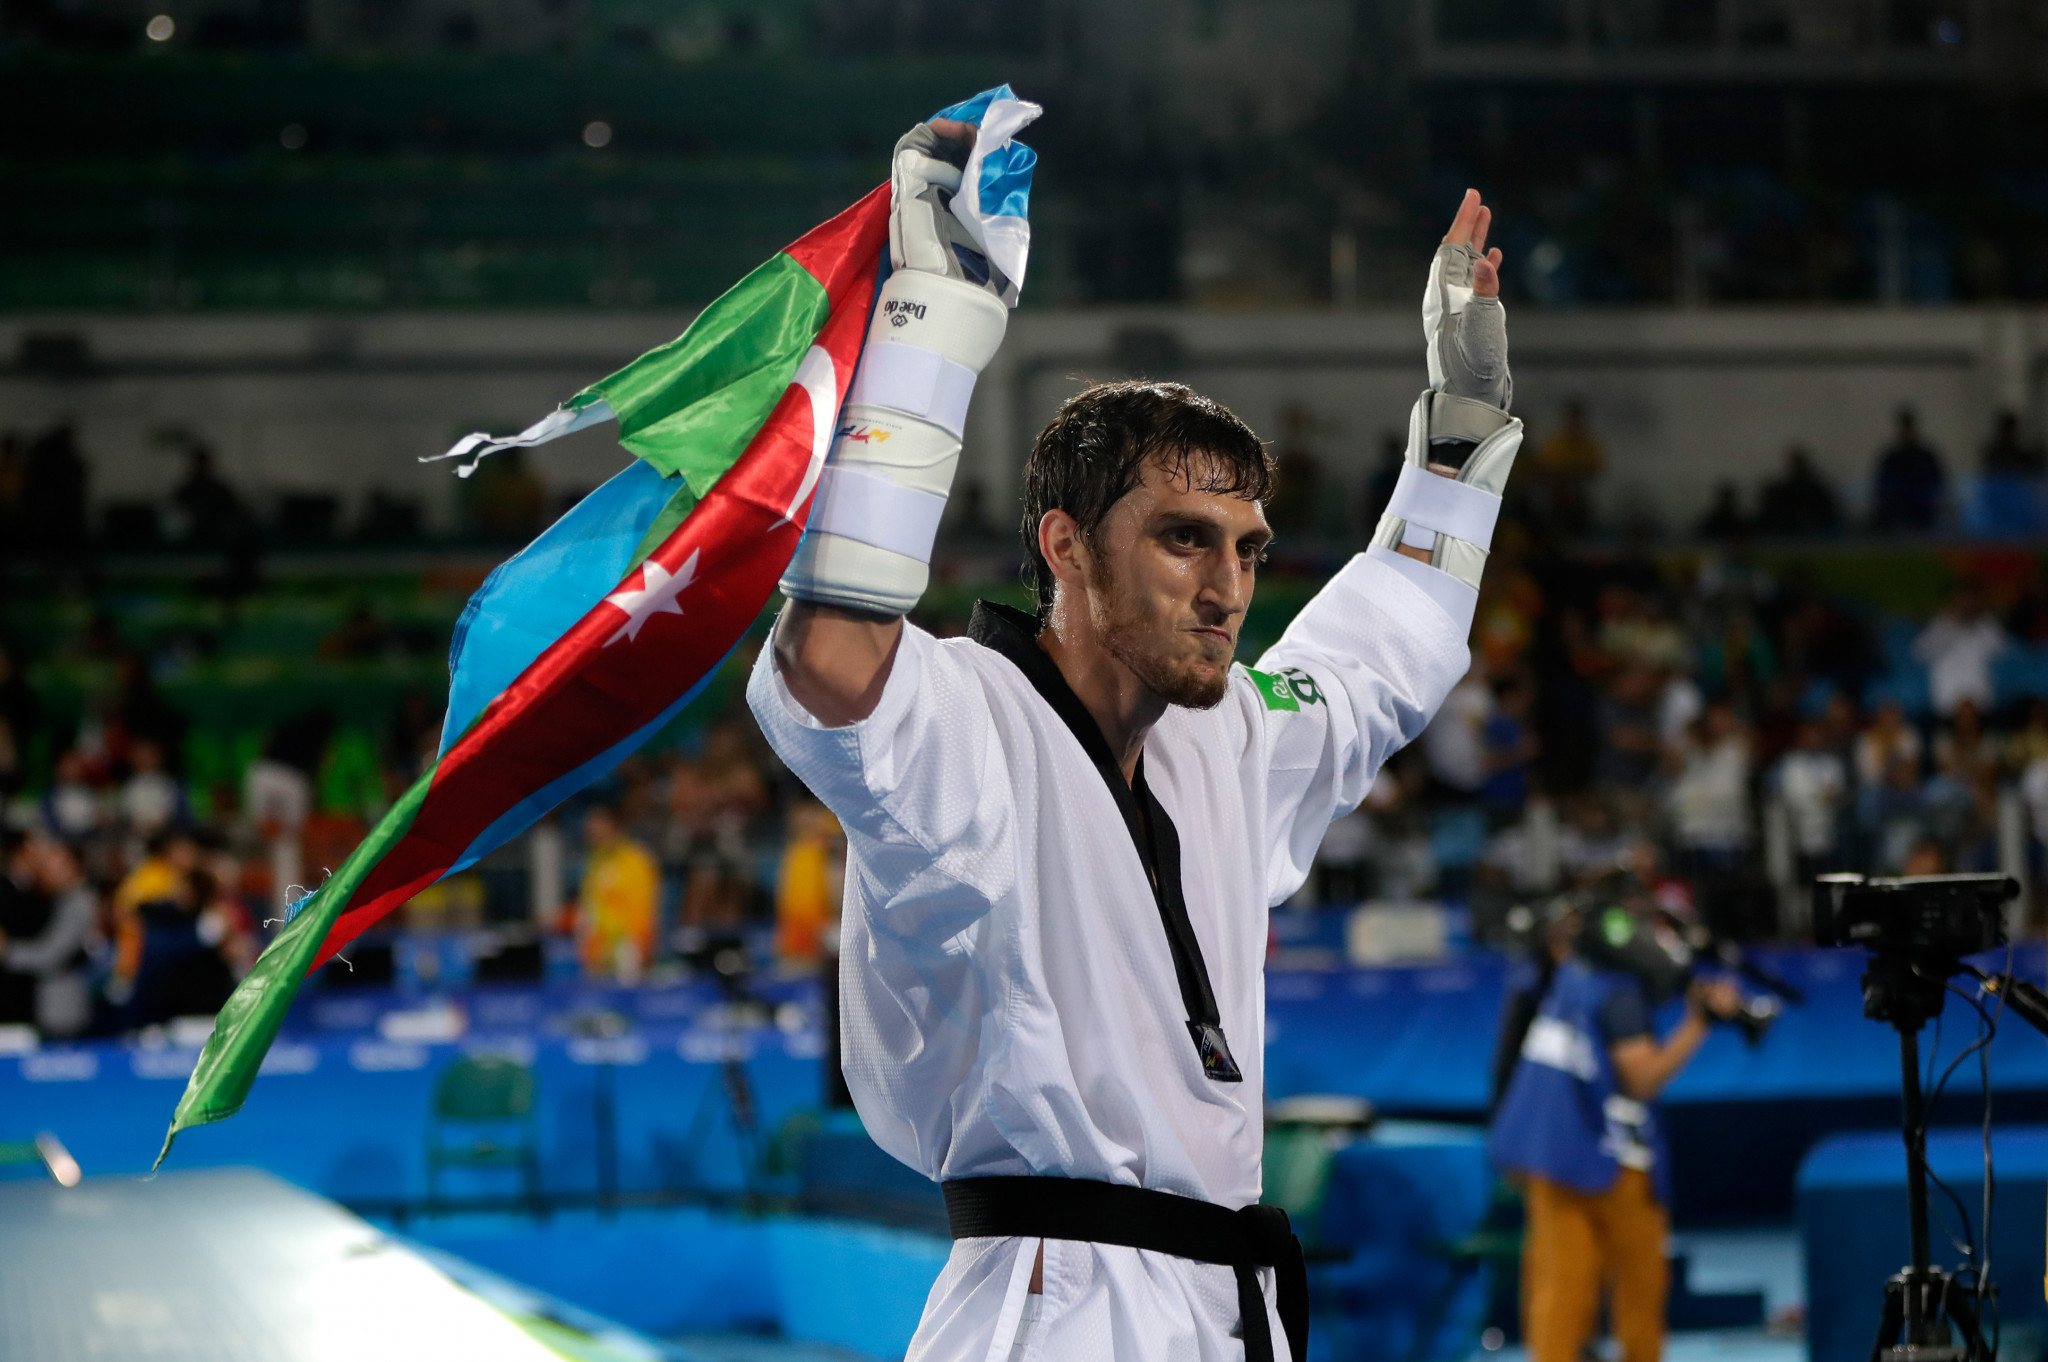 Radik Isaev who won taekwondo gold at Rio in 2016 is the most recent Olympic champion from Azerbaijan ©Getty Images